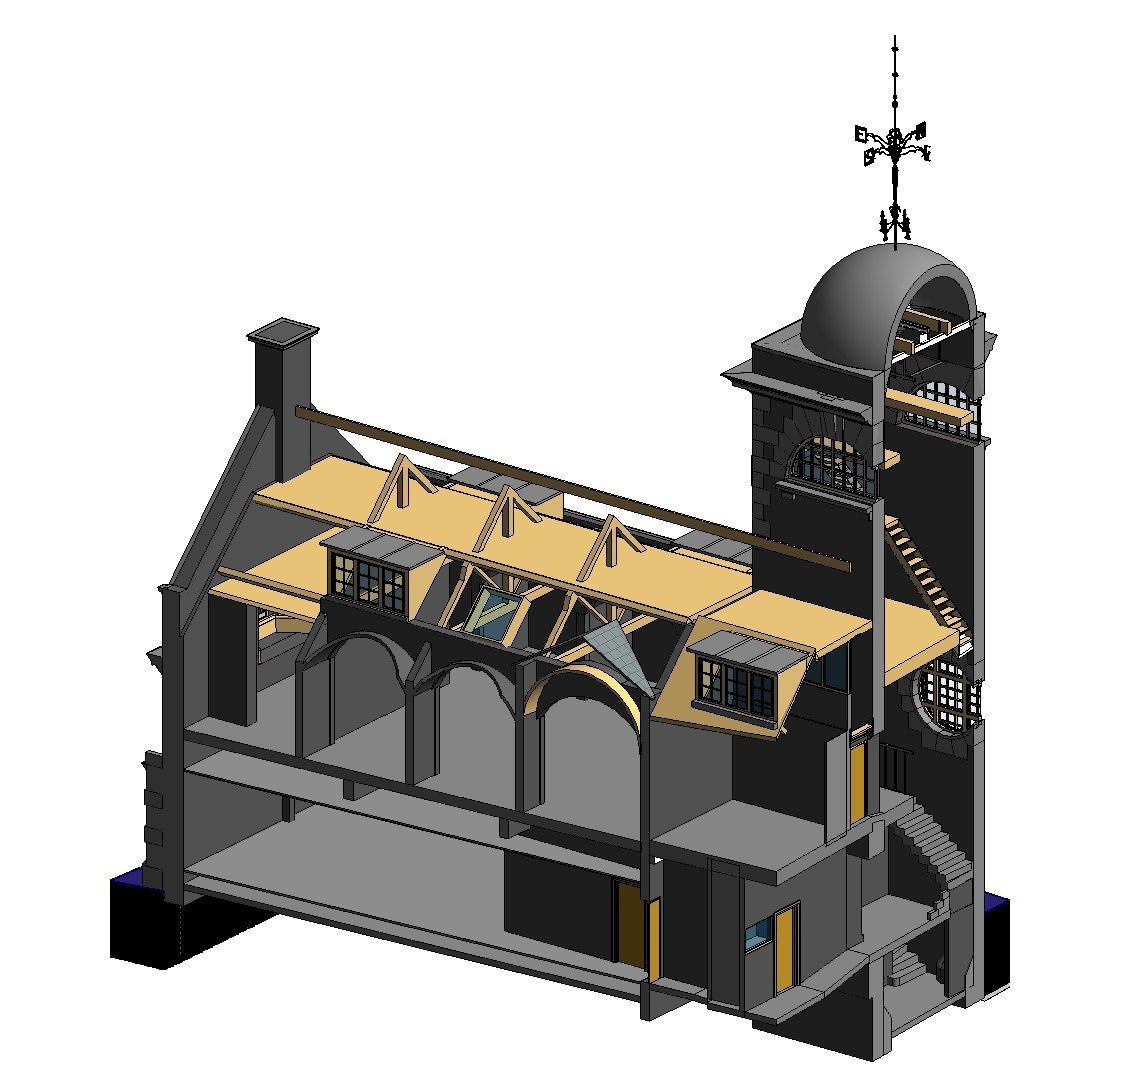 3D cut away sectional view of the old fire station in Lancaster